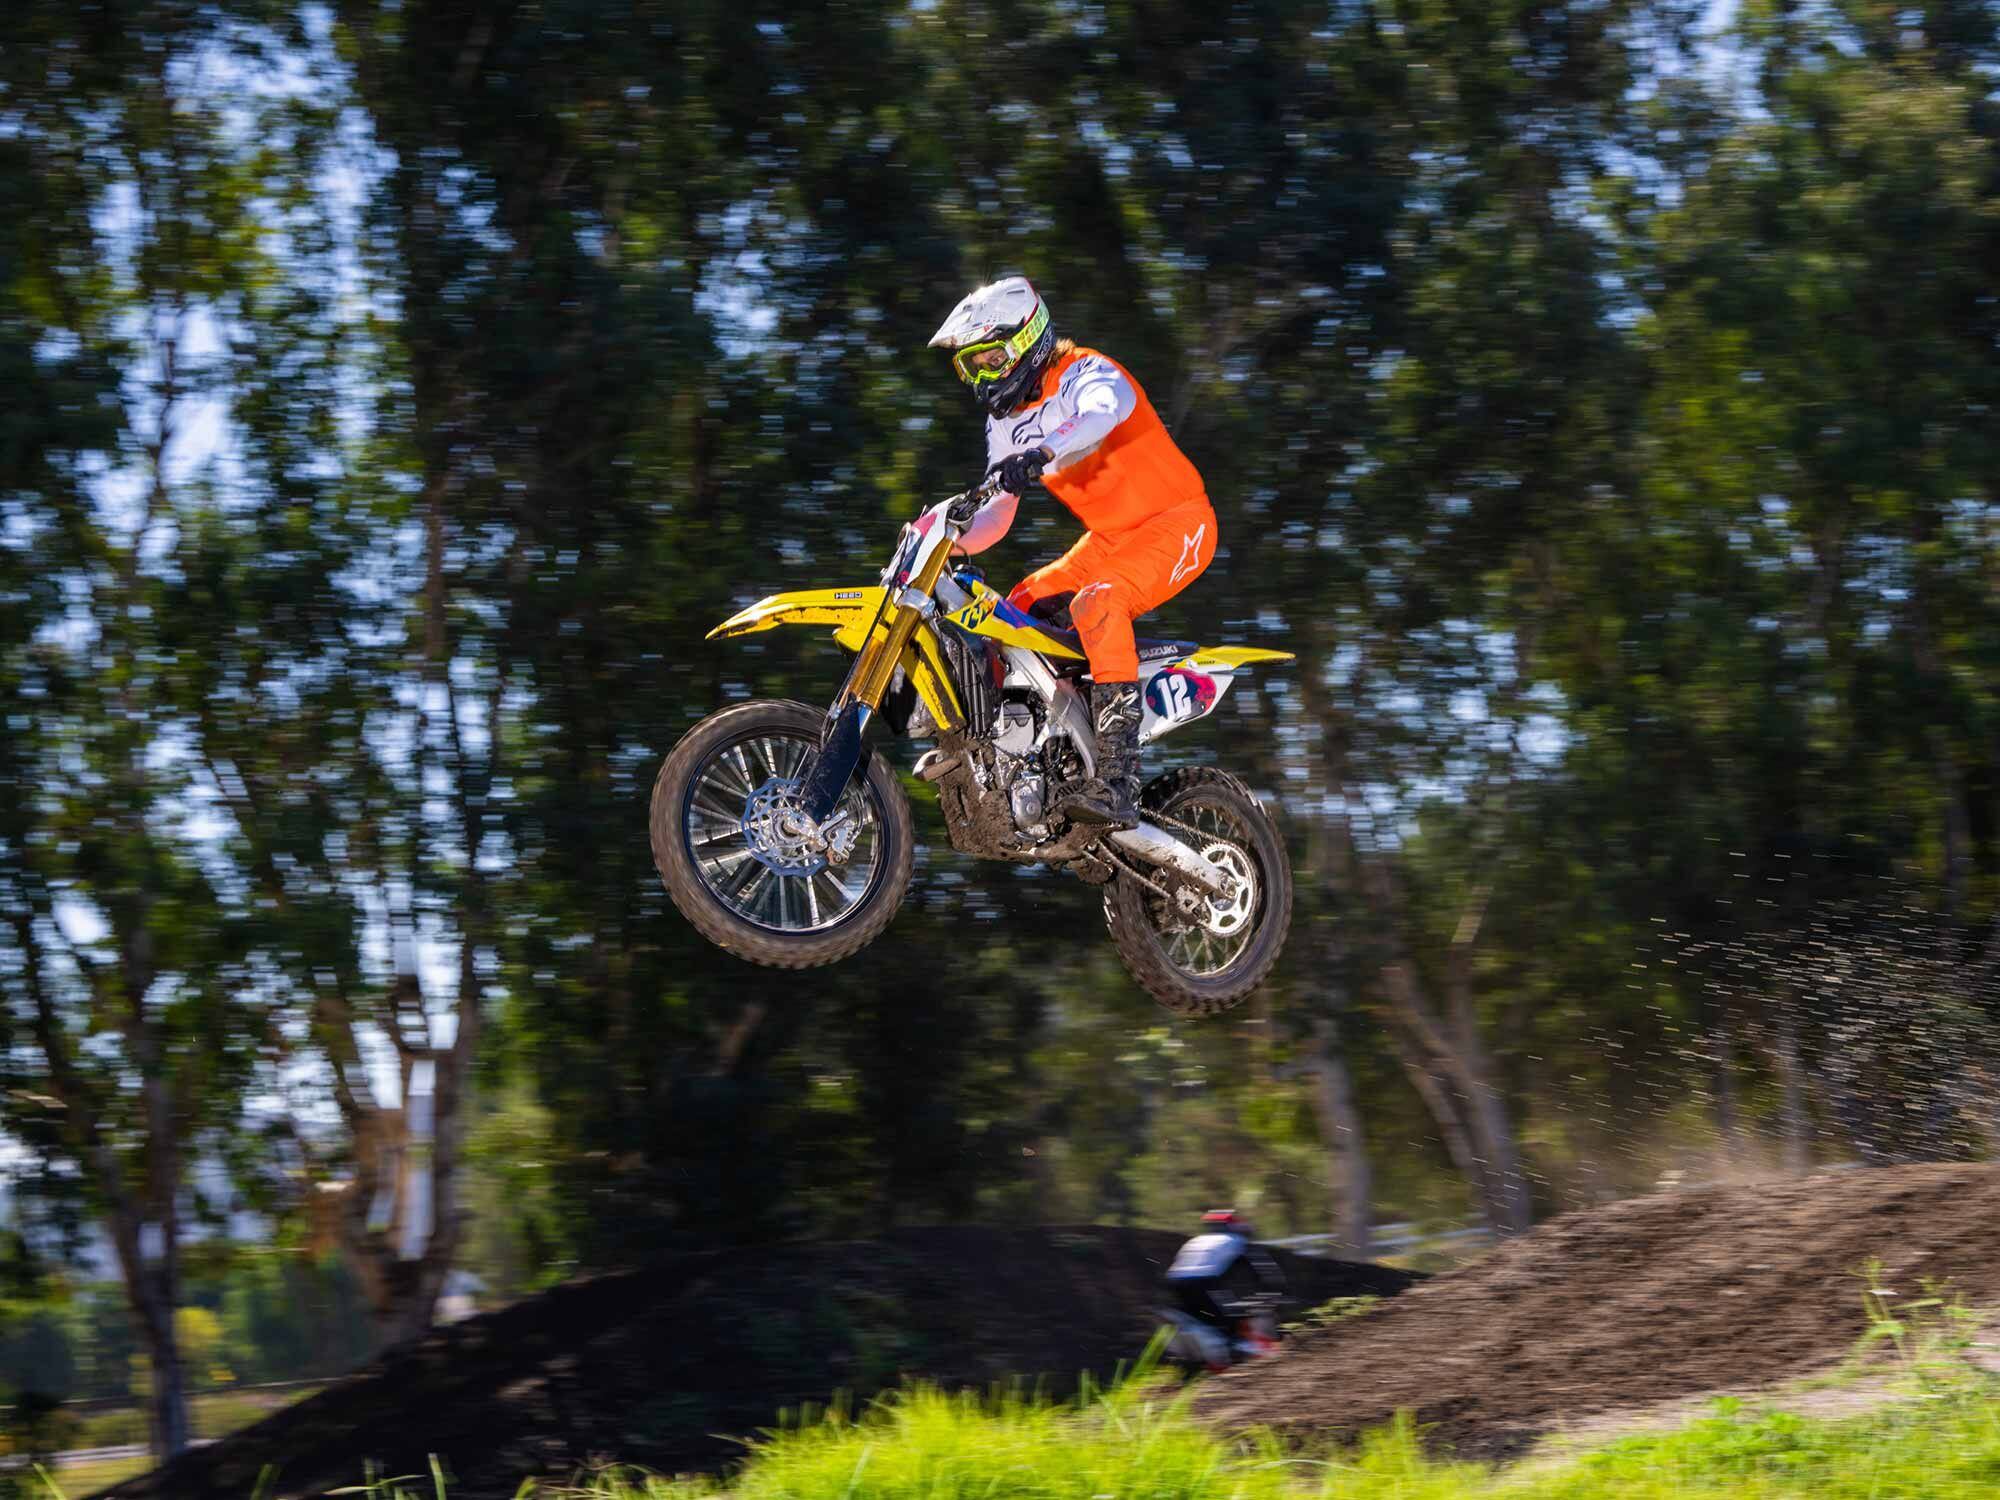 Every now and then, it’s fun to throw some dirt bike roost and Suzuki’s RM-Z’s a great way to do it.